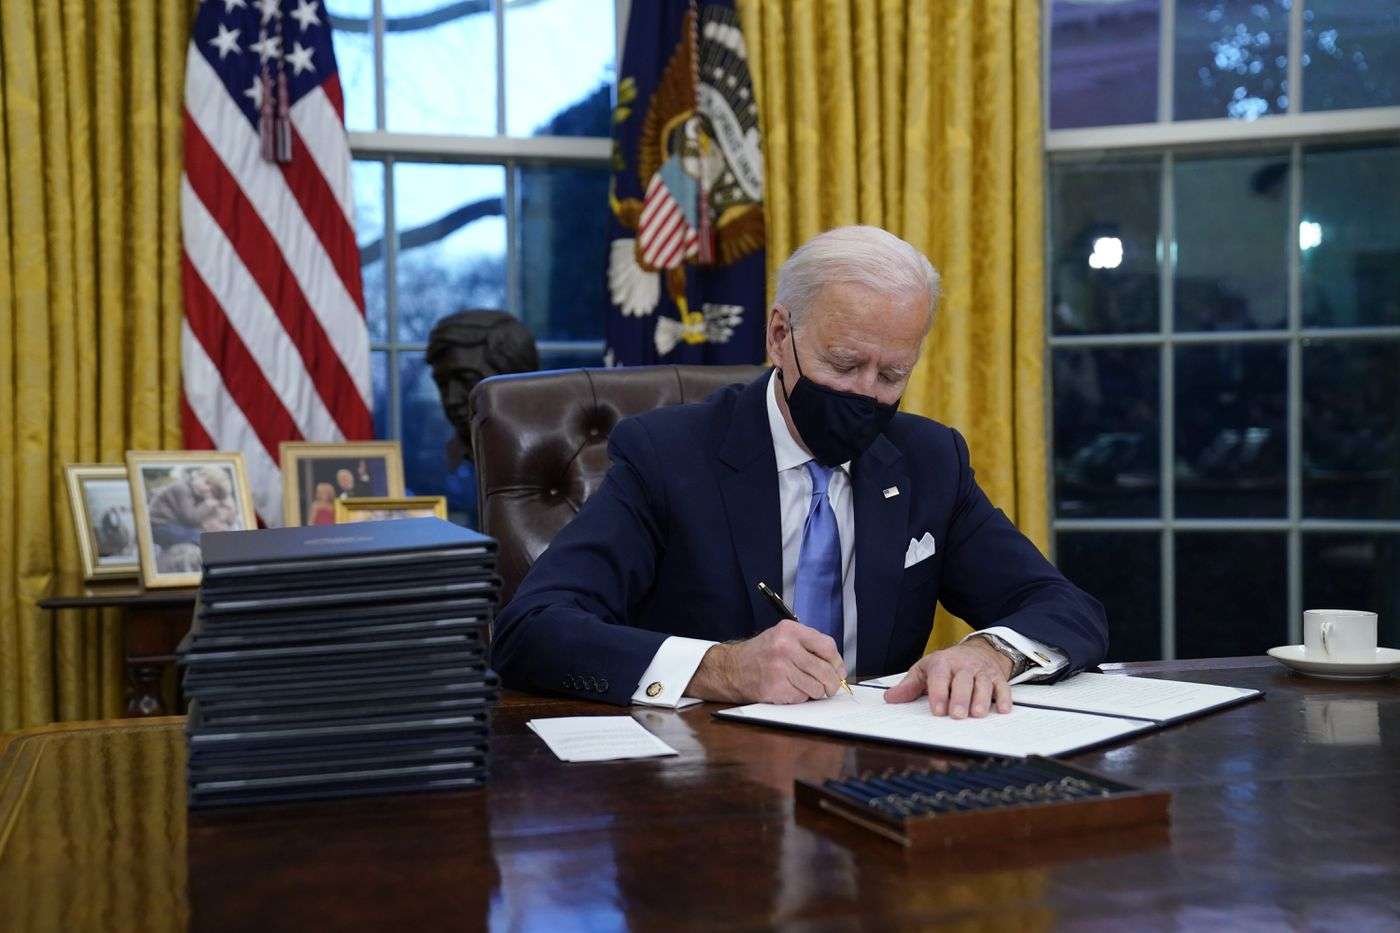 President Joe Biden signs his first executive order in the Oval Office of the White House on Wednesday.